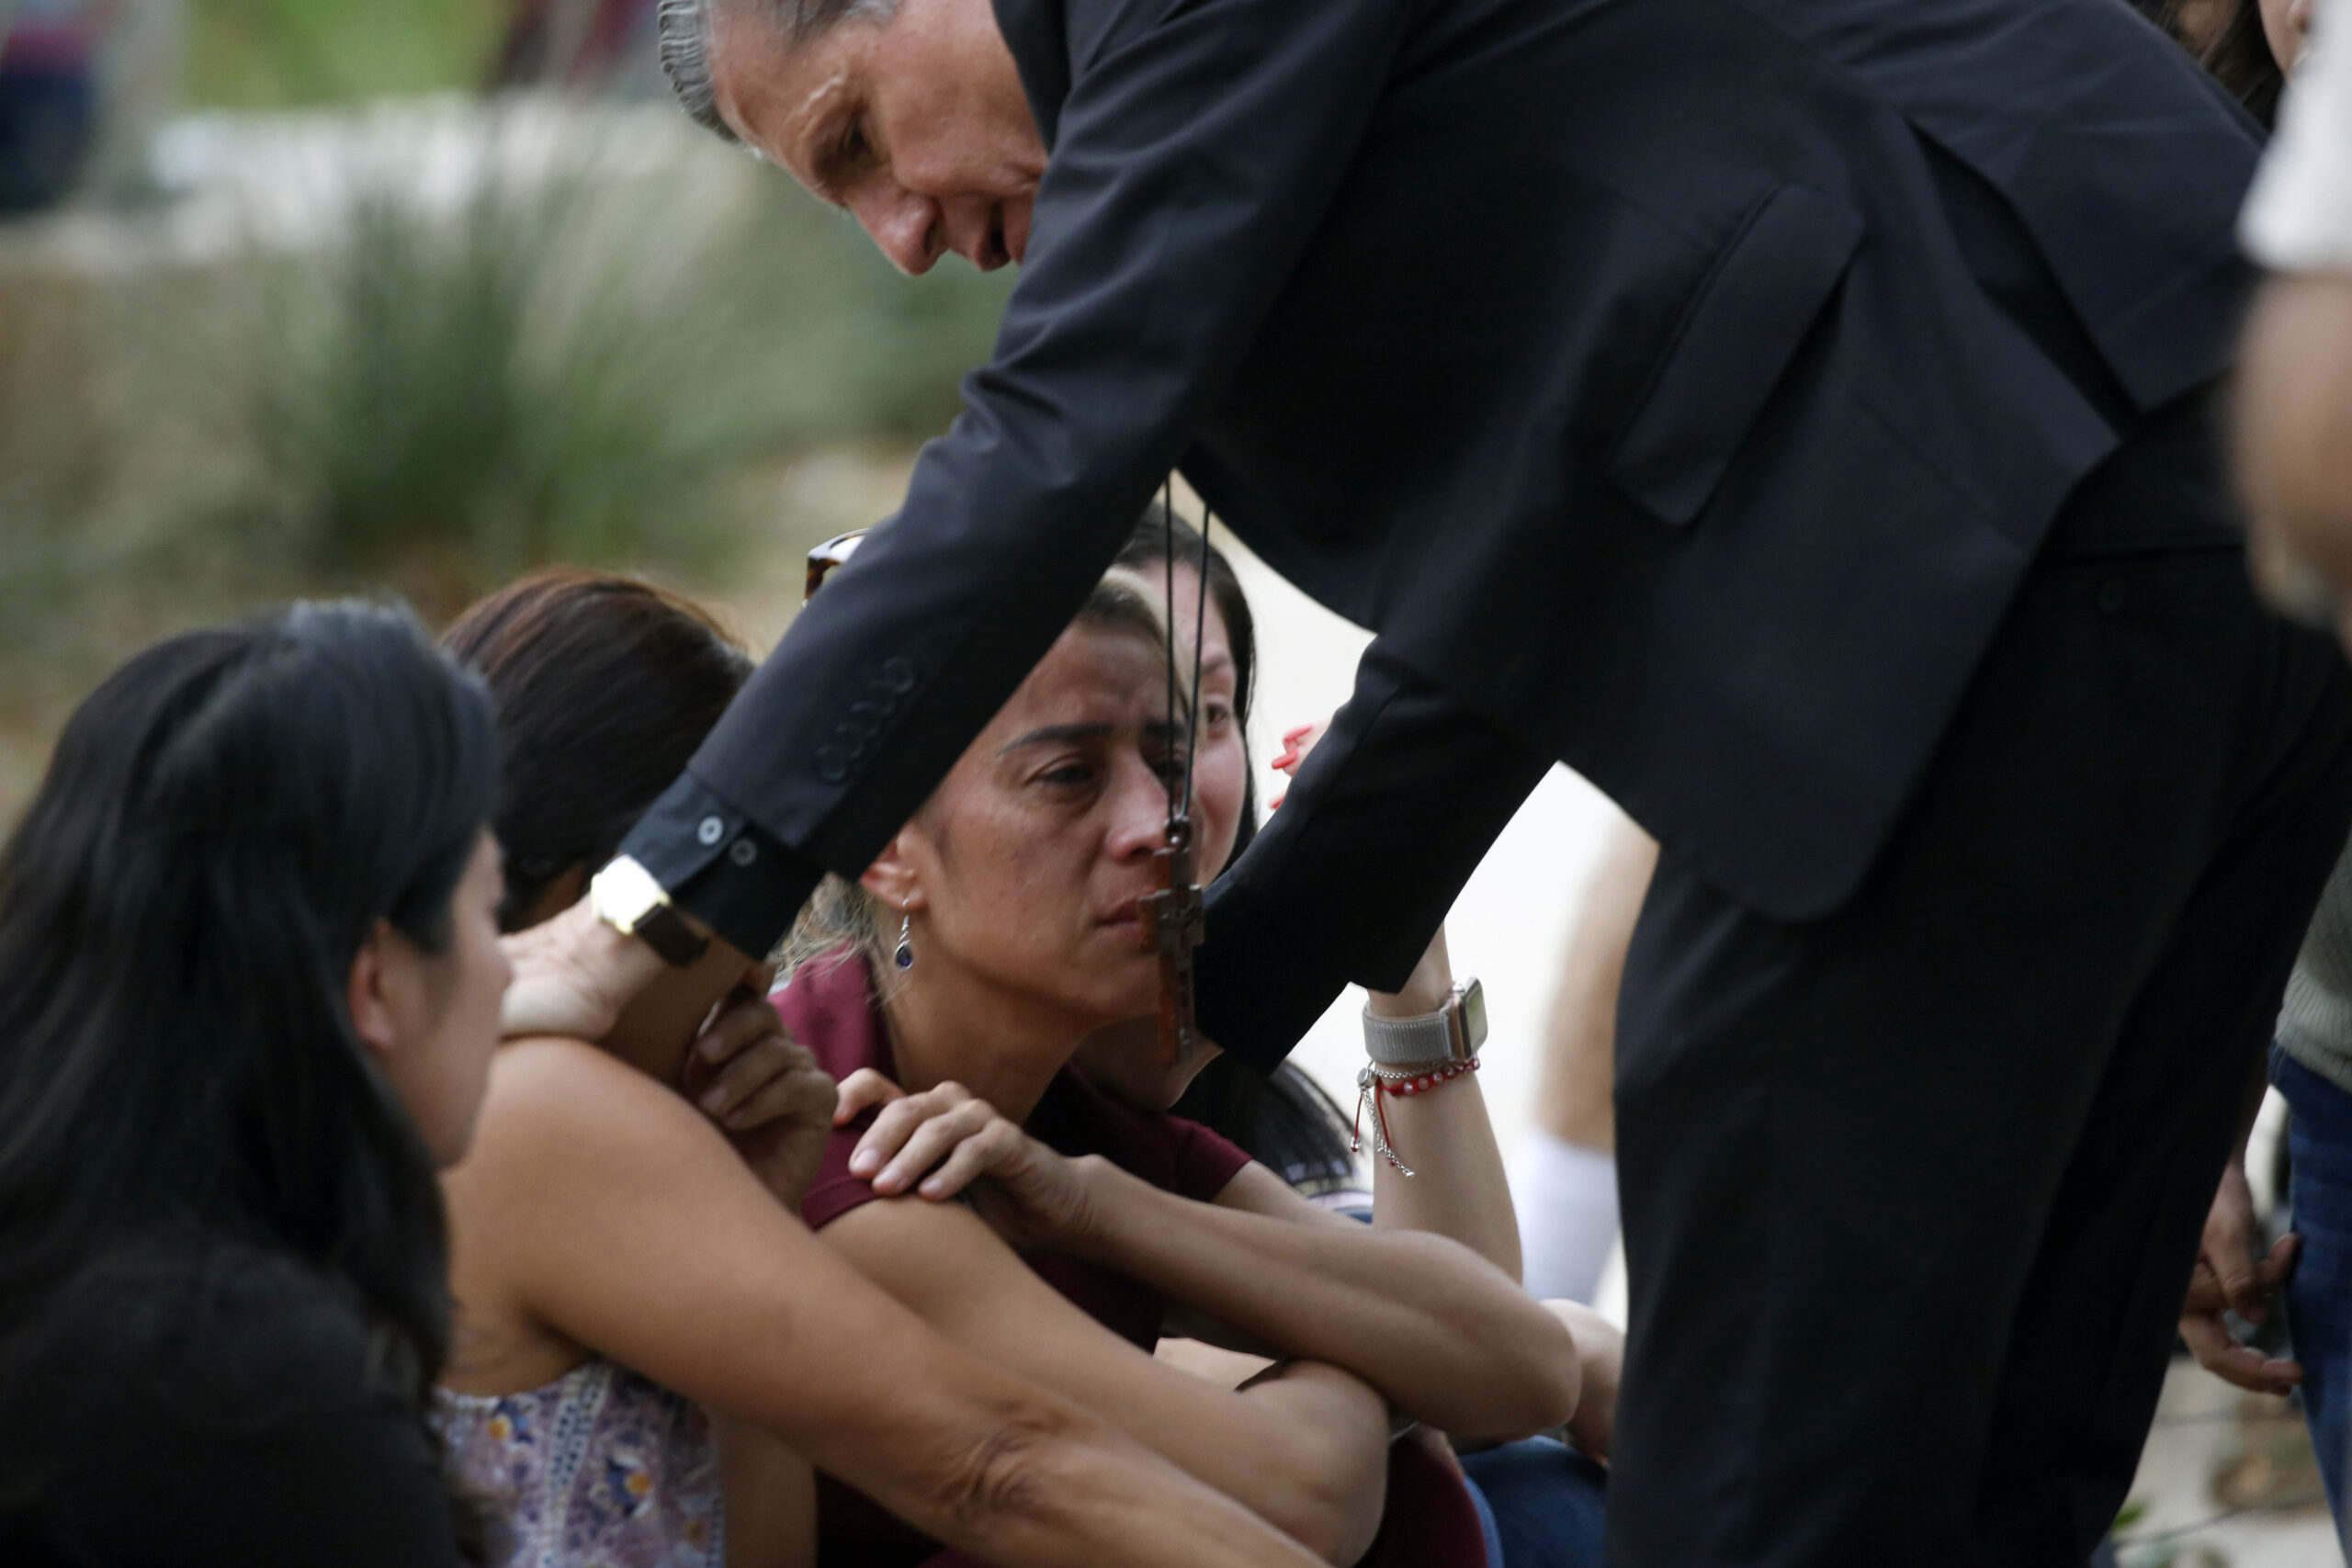 The archbishop of San Antonio comforts families following a deadly school shooting at Robb Elementary School